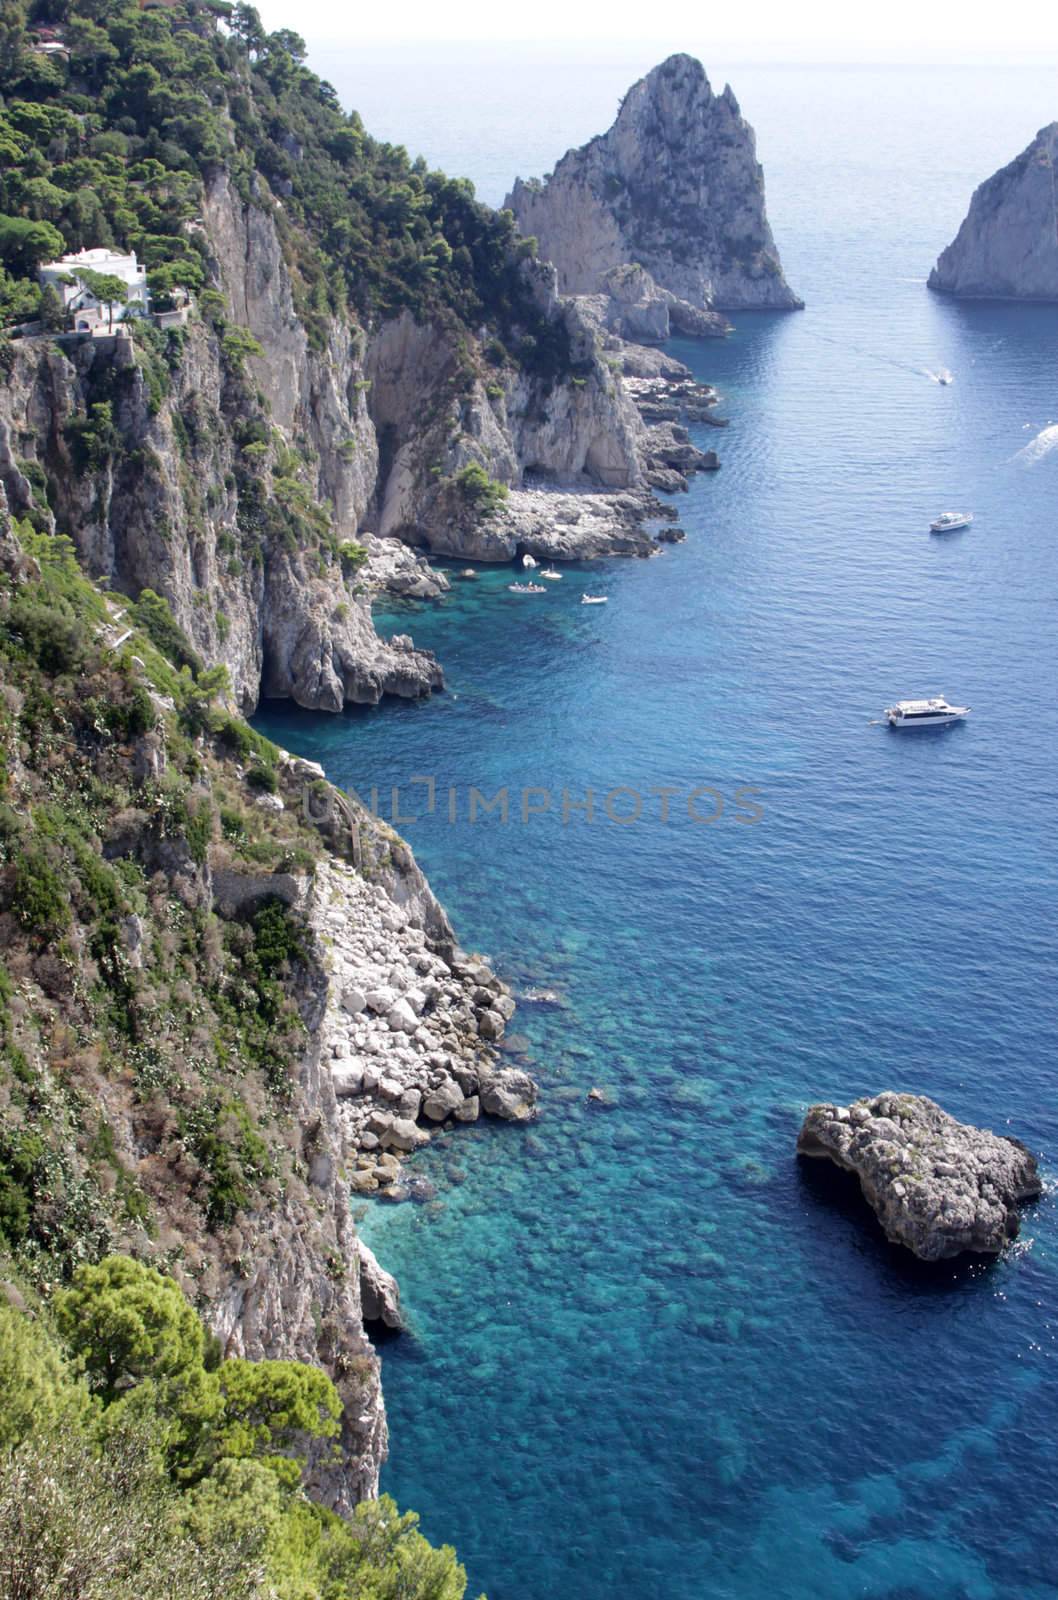 The coastline of the island of Capri, which is off Sorrentine peninsula in the Bay of Naples, Italy.
